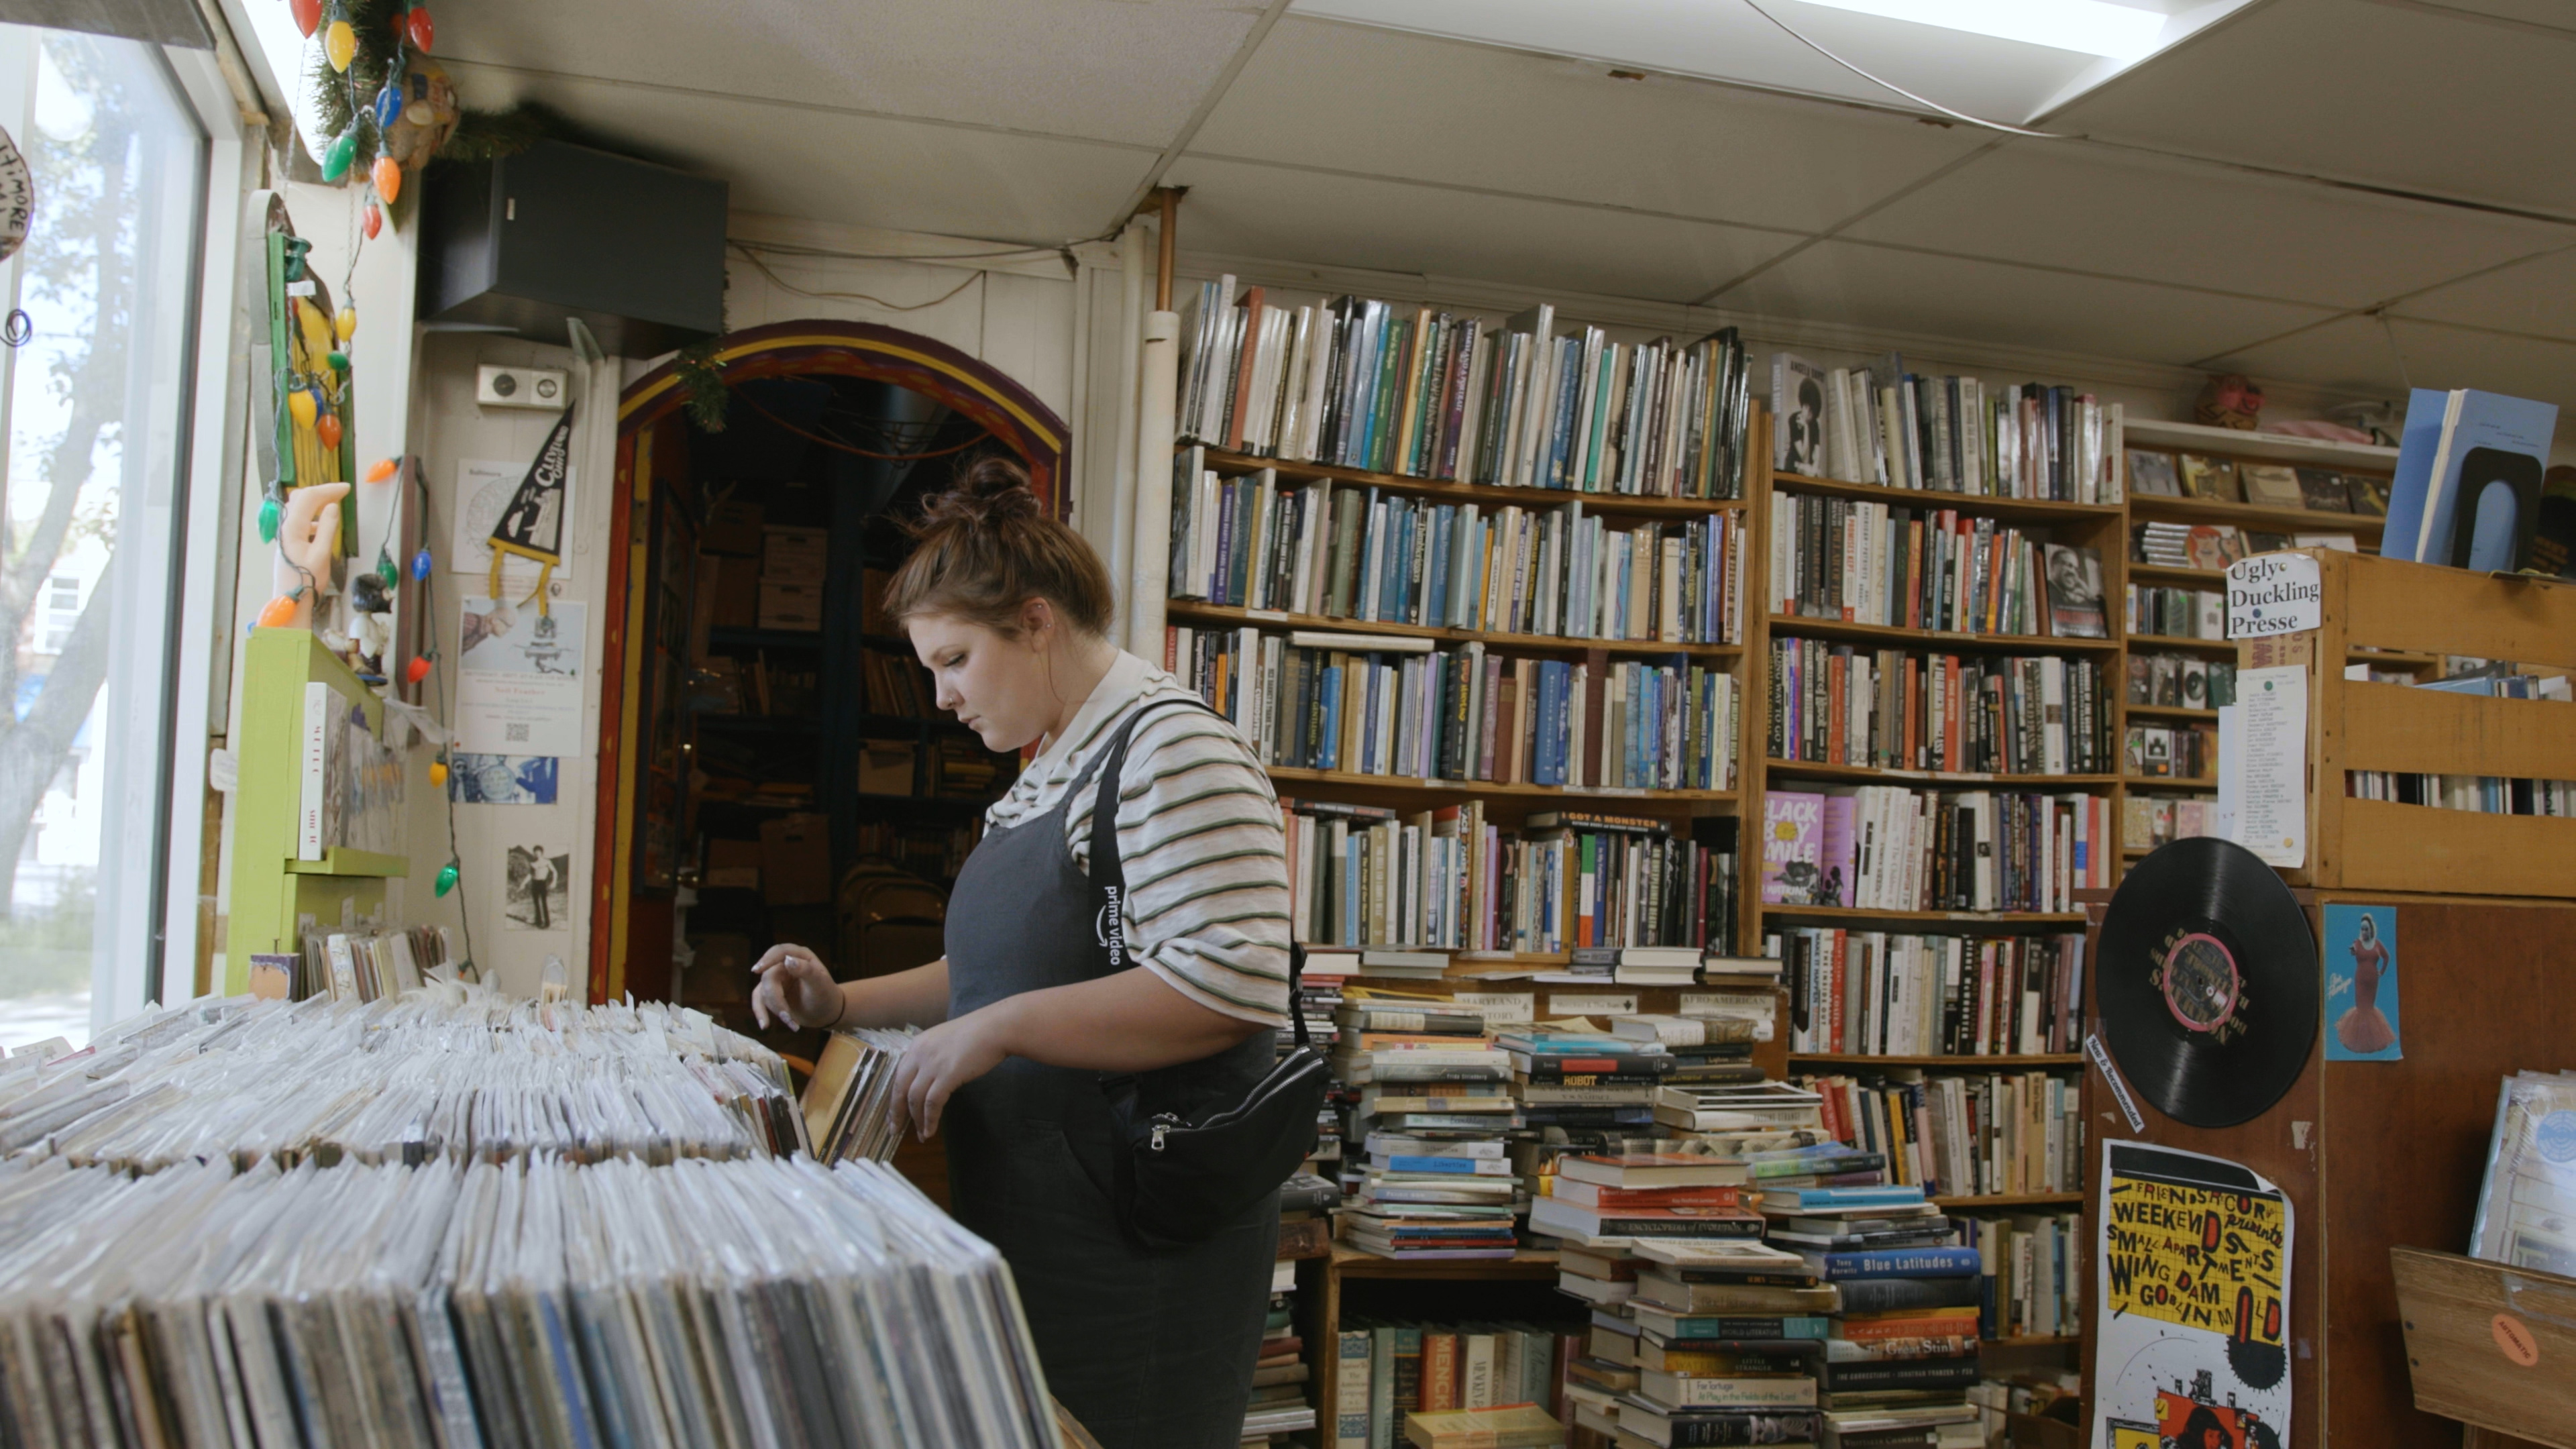 Person stands and looks through bin of records in a record store.